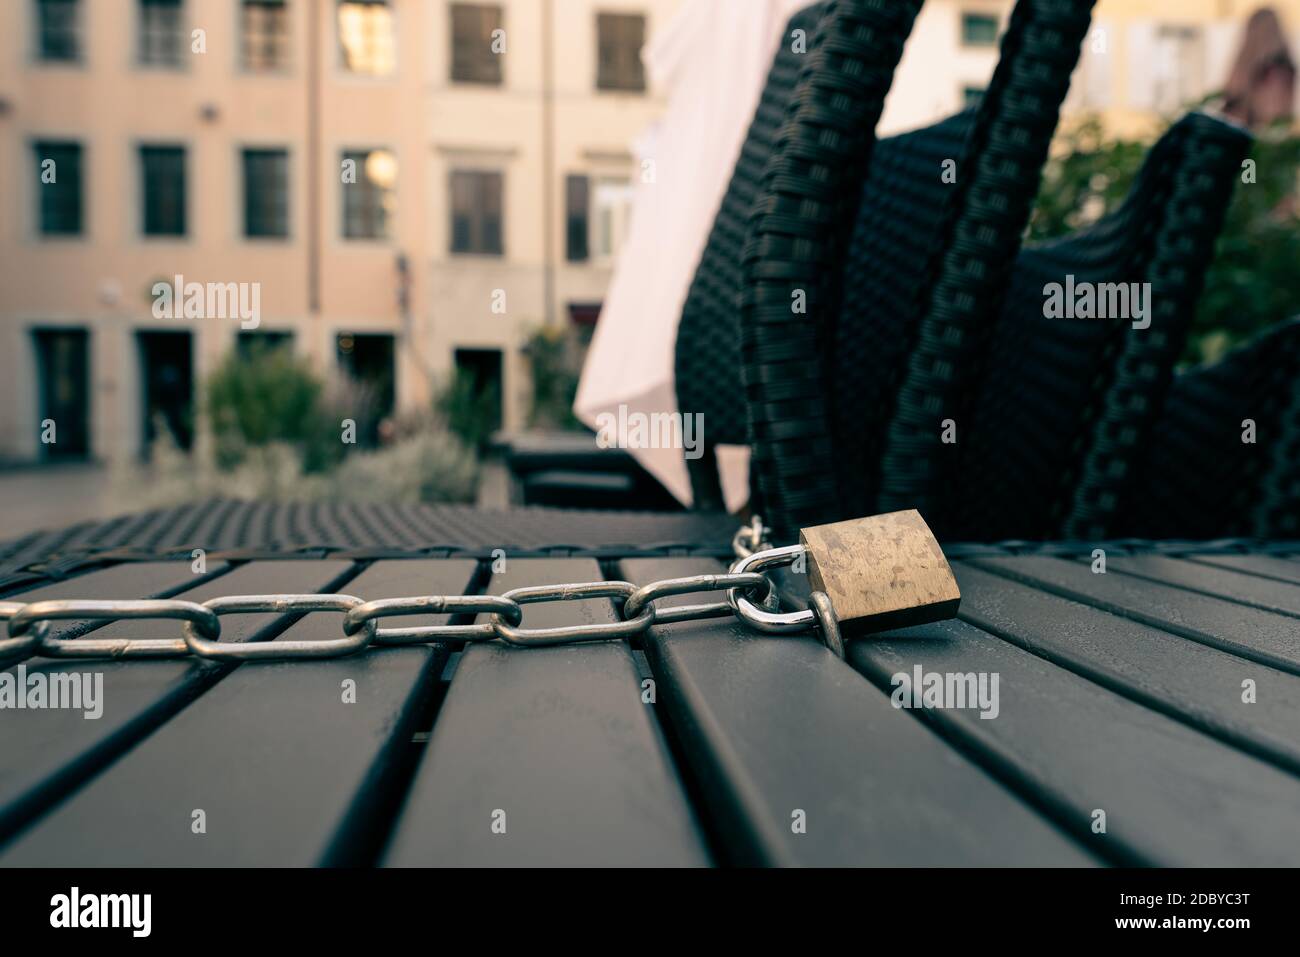 Padlock and chain locking a table and chairs of a closed open air bar during the Italian lockdown due to coronavirus. Stock Photo